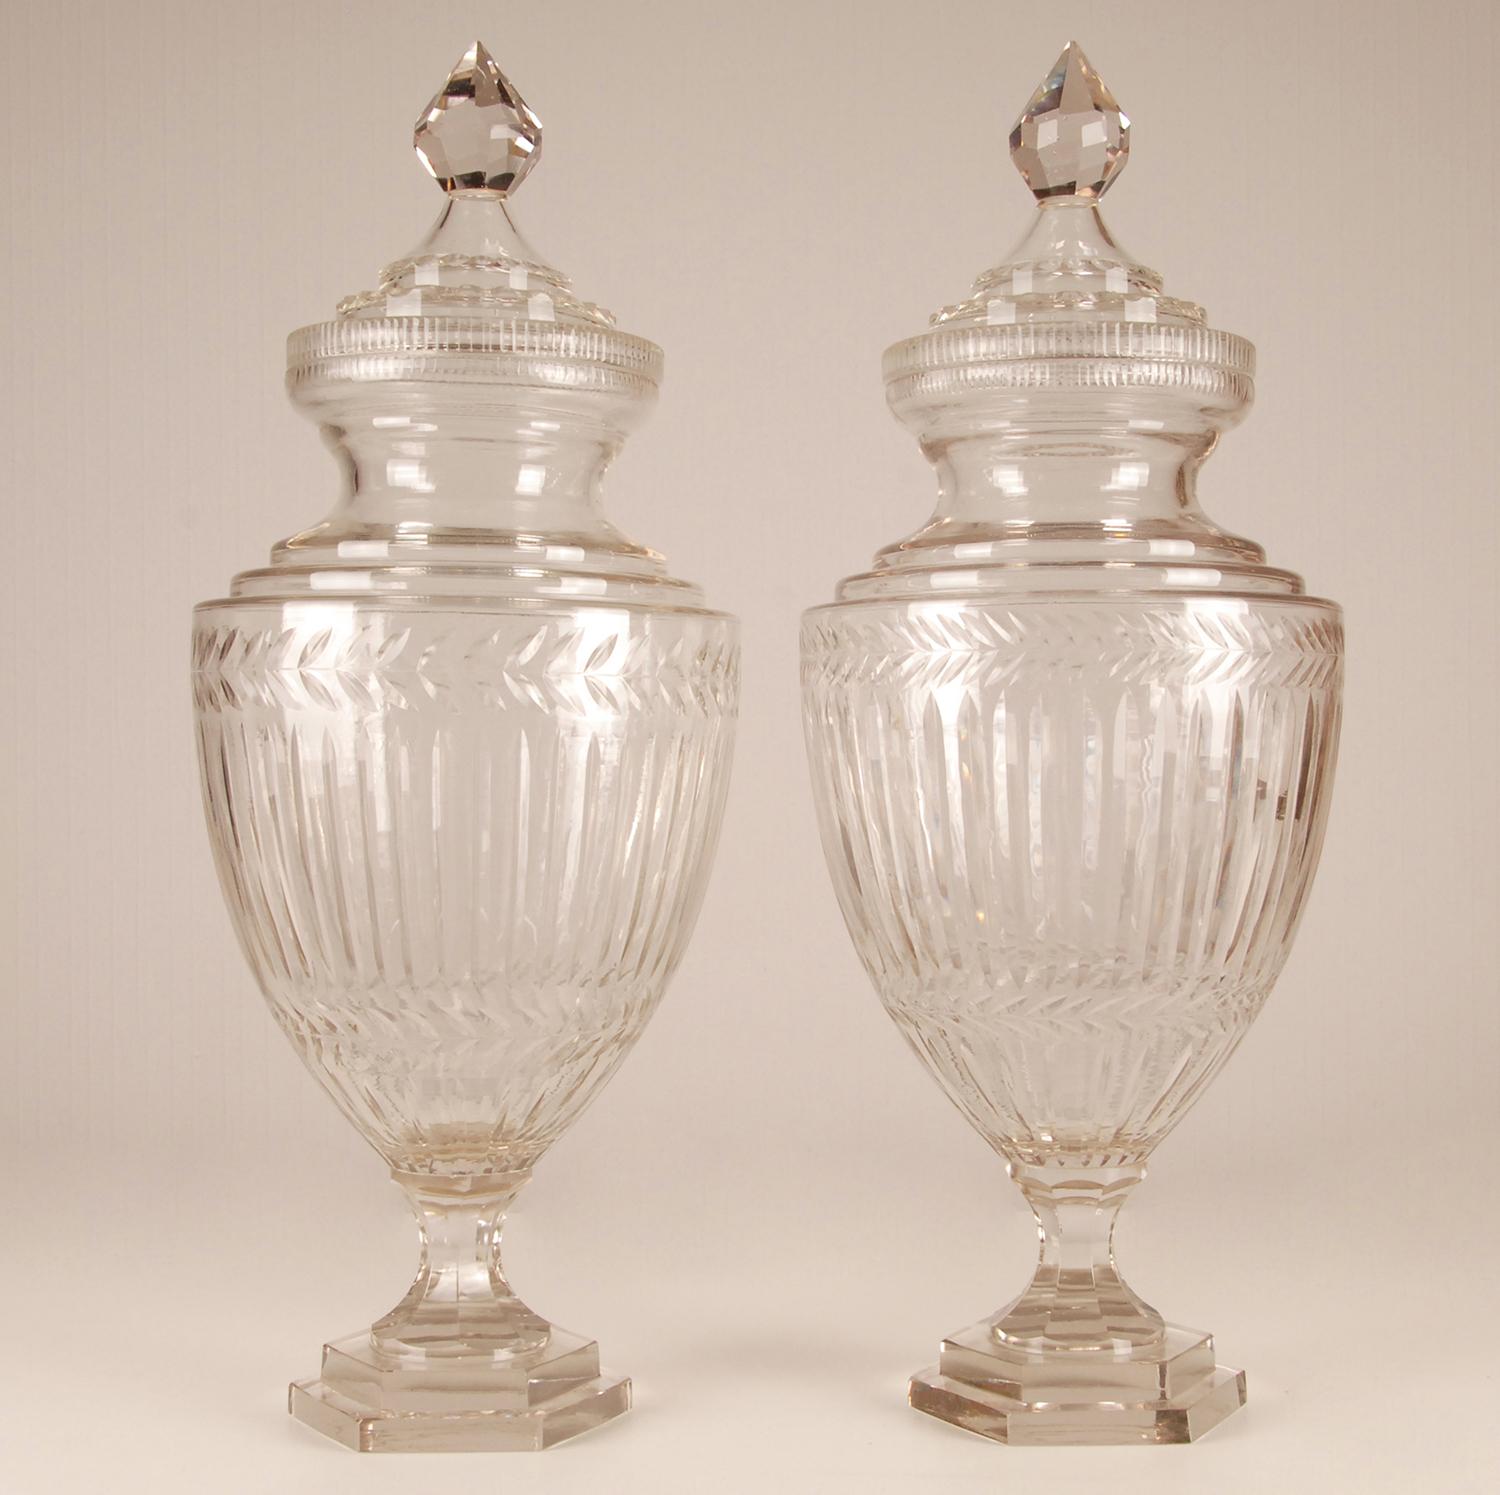 Victorian clear glass covered urns cut crystal vases
Material: Glass, crystal, cut crystal, engraved glass, mounted
Design: Made in the manner of Baccarat, Saint Louis, Val saint Lambert
Style: Neoclassical, Victorian, Antique, 19th century,